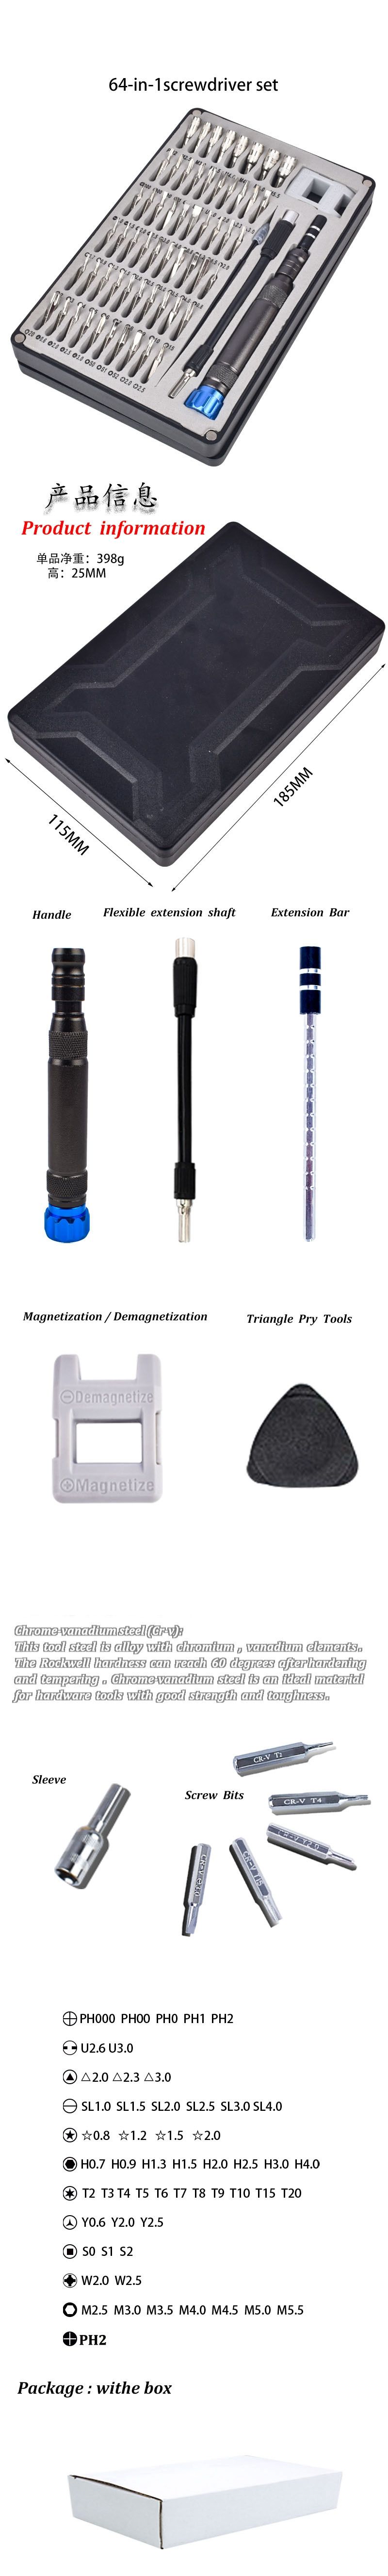 64-in-1-Precision-Screwdriver-Magnetic-Screw-Driver-Multi-Function-Watch-Phone-Disassembly-Electroni-1565173